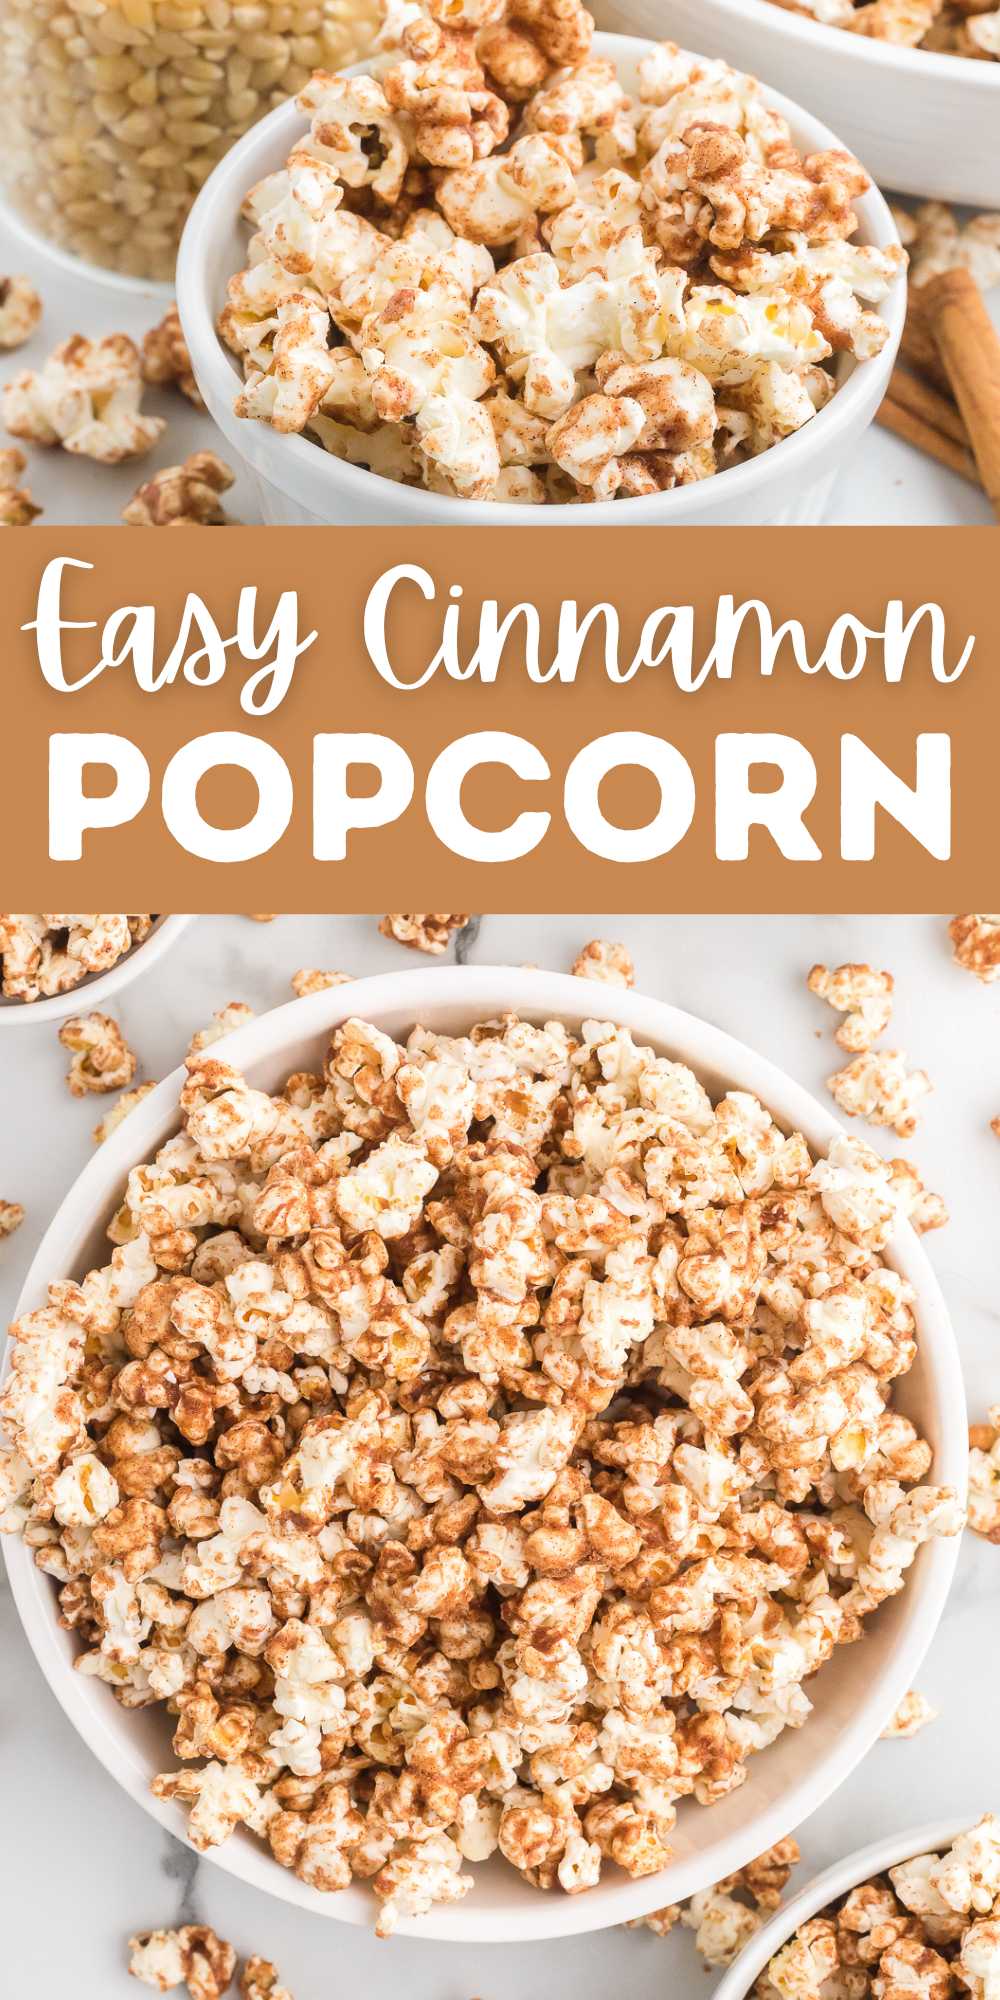 We love making this Cinnamon Popcorn for movie night or for an afternoon snack. Loaded with cinnamon and sugar to make this popcorn recipe. You only need a few ingredients to turn your plain popcorn into an addicting snack. The blend of the melted butter, cinnamon and sugar makes this treat so delicious. #eatingonadime #cinnamonpopcorn #popcorn #snack